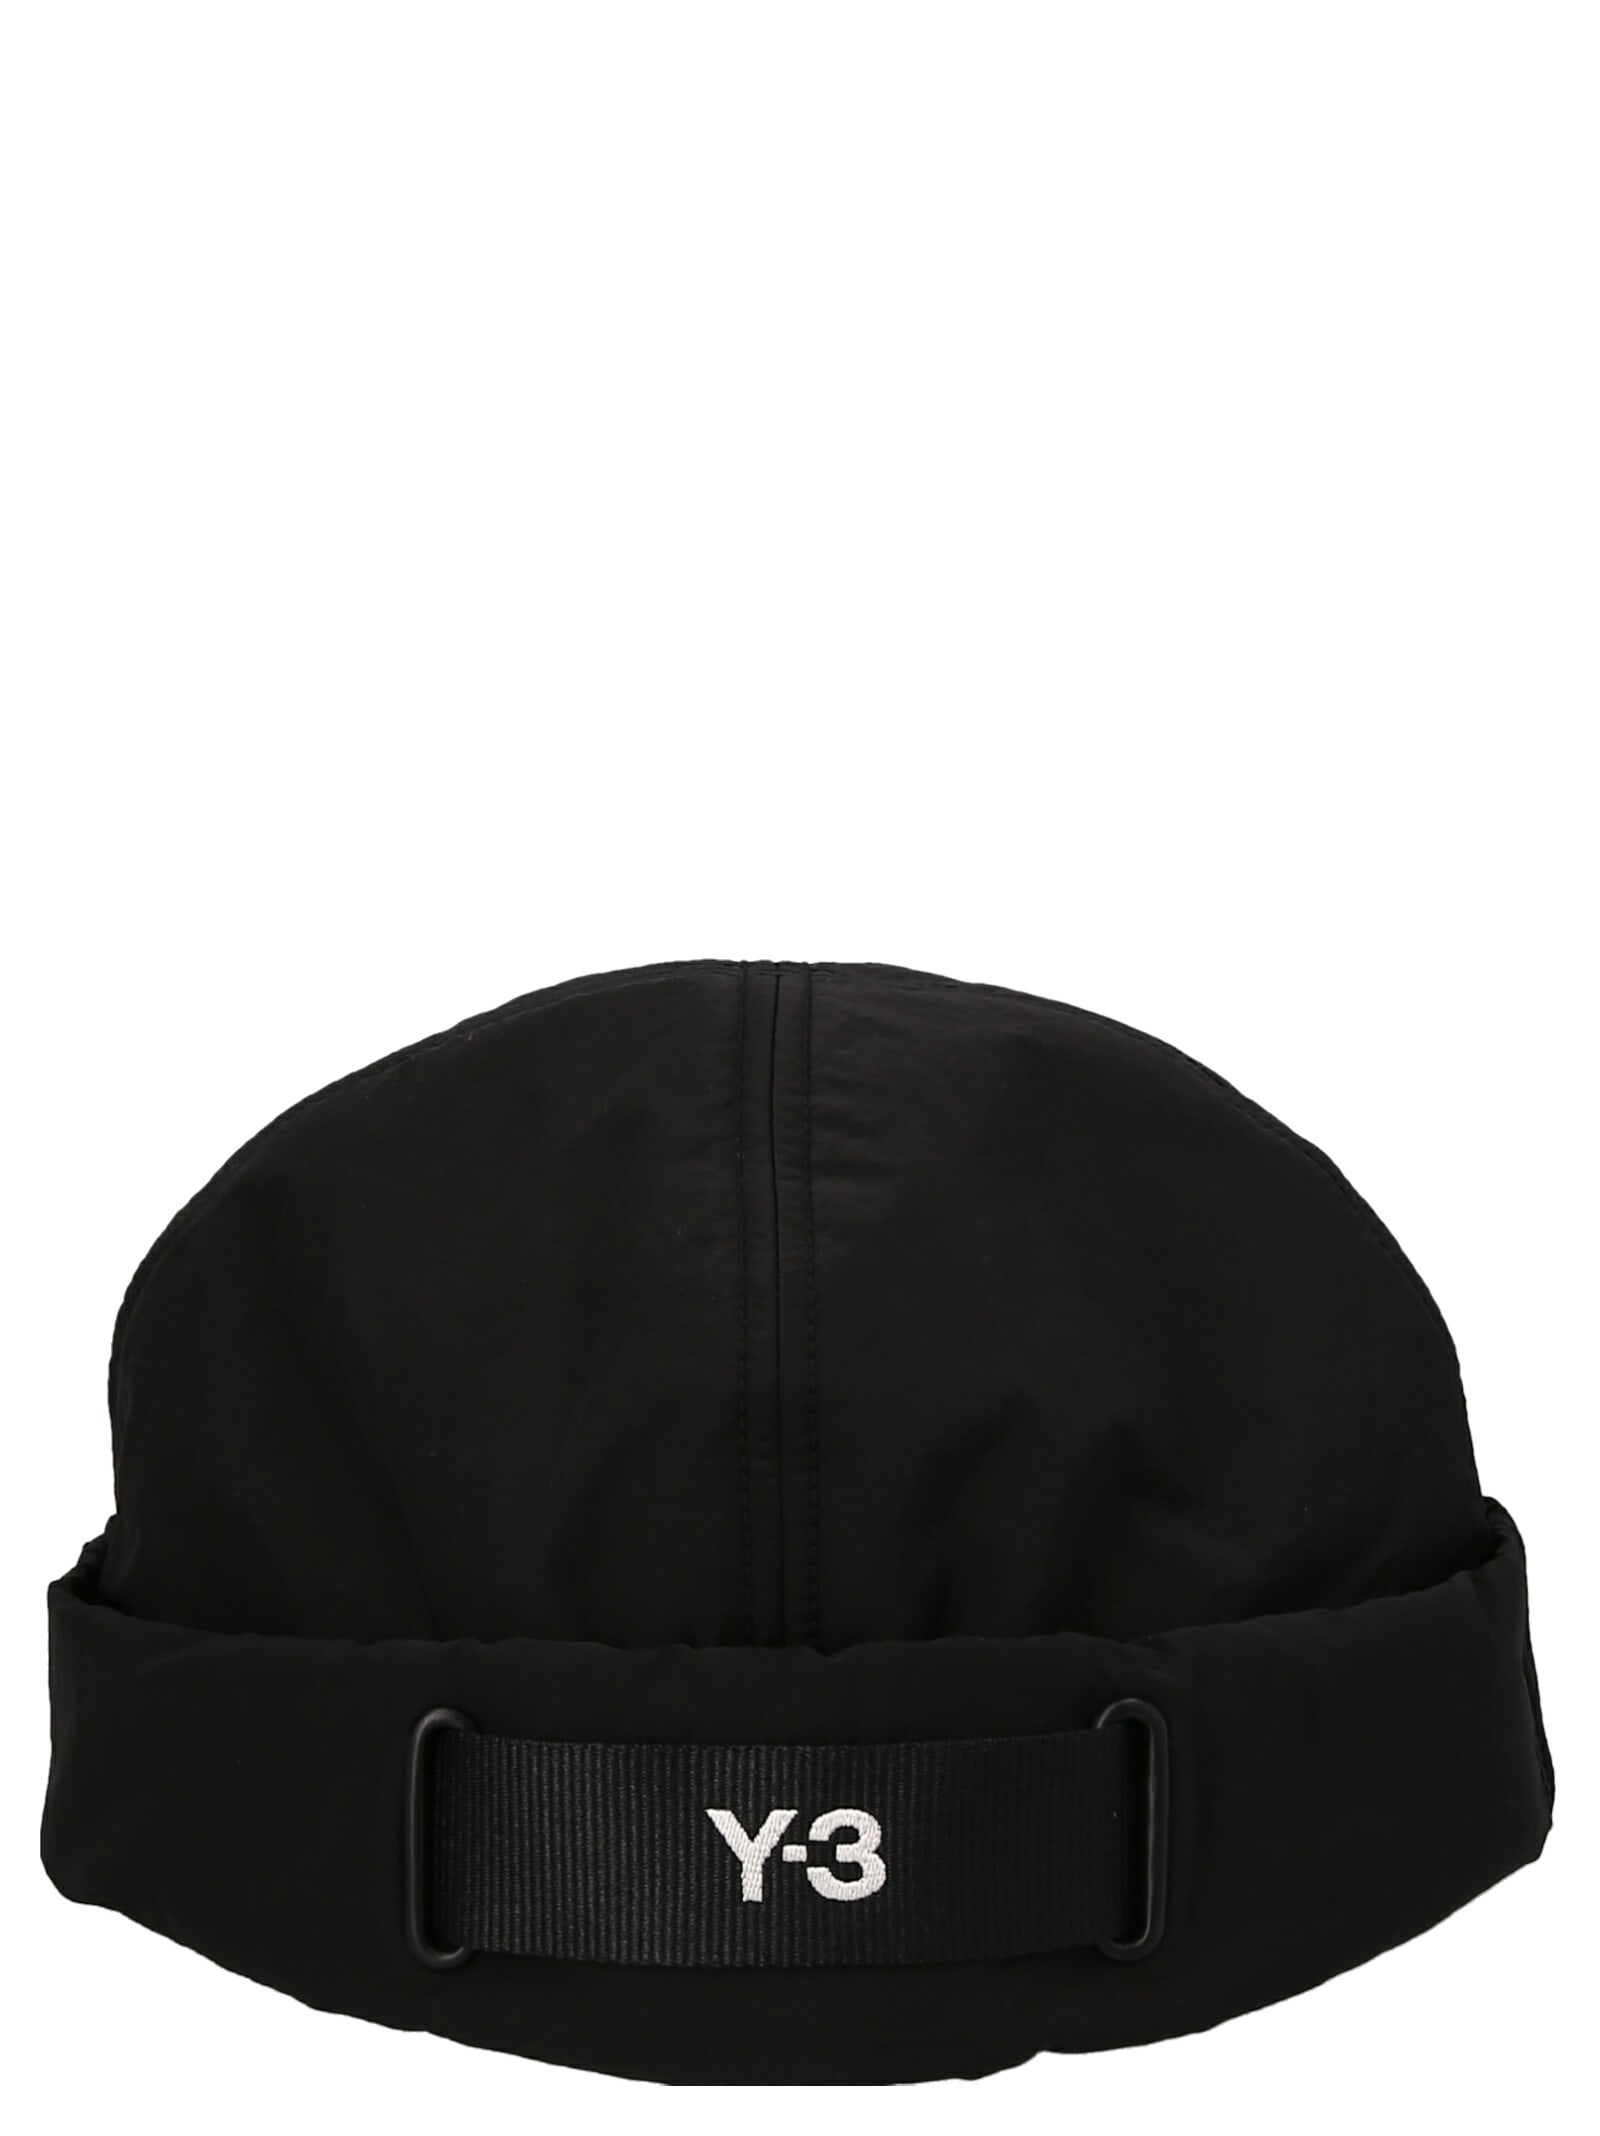 Y-3 LOGO EMBROIDERY HAT